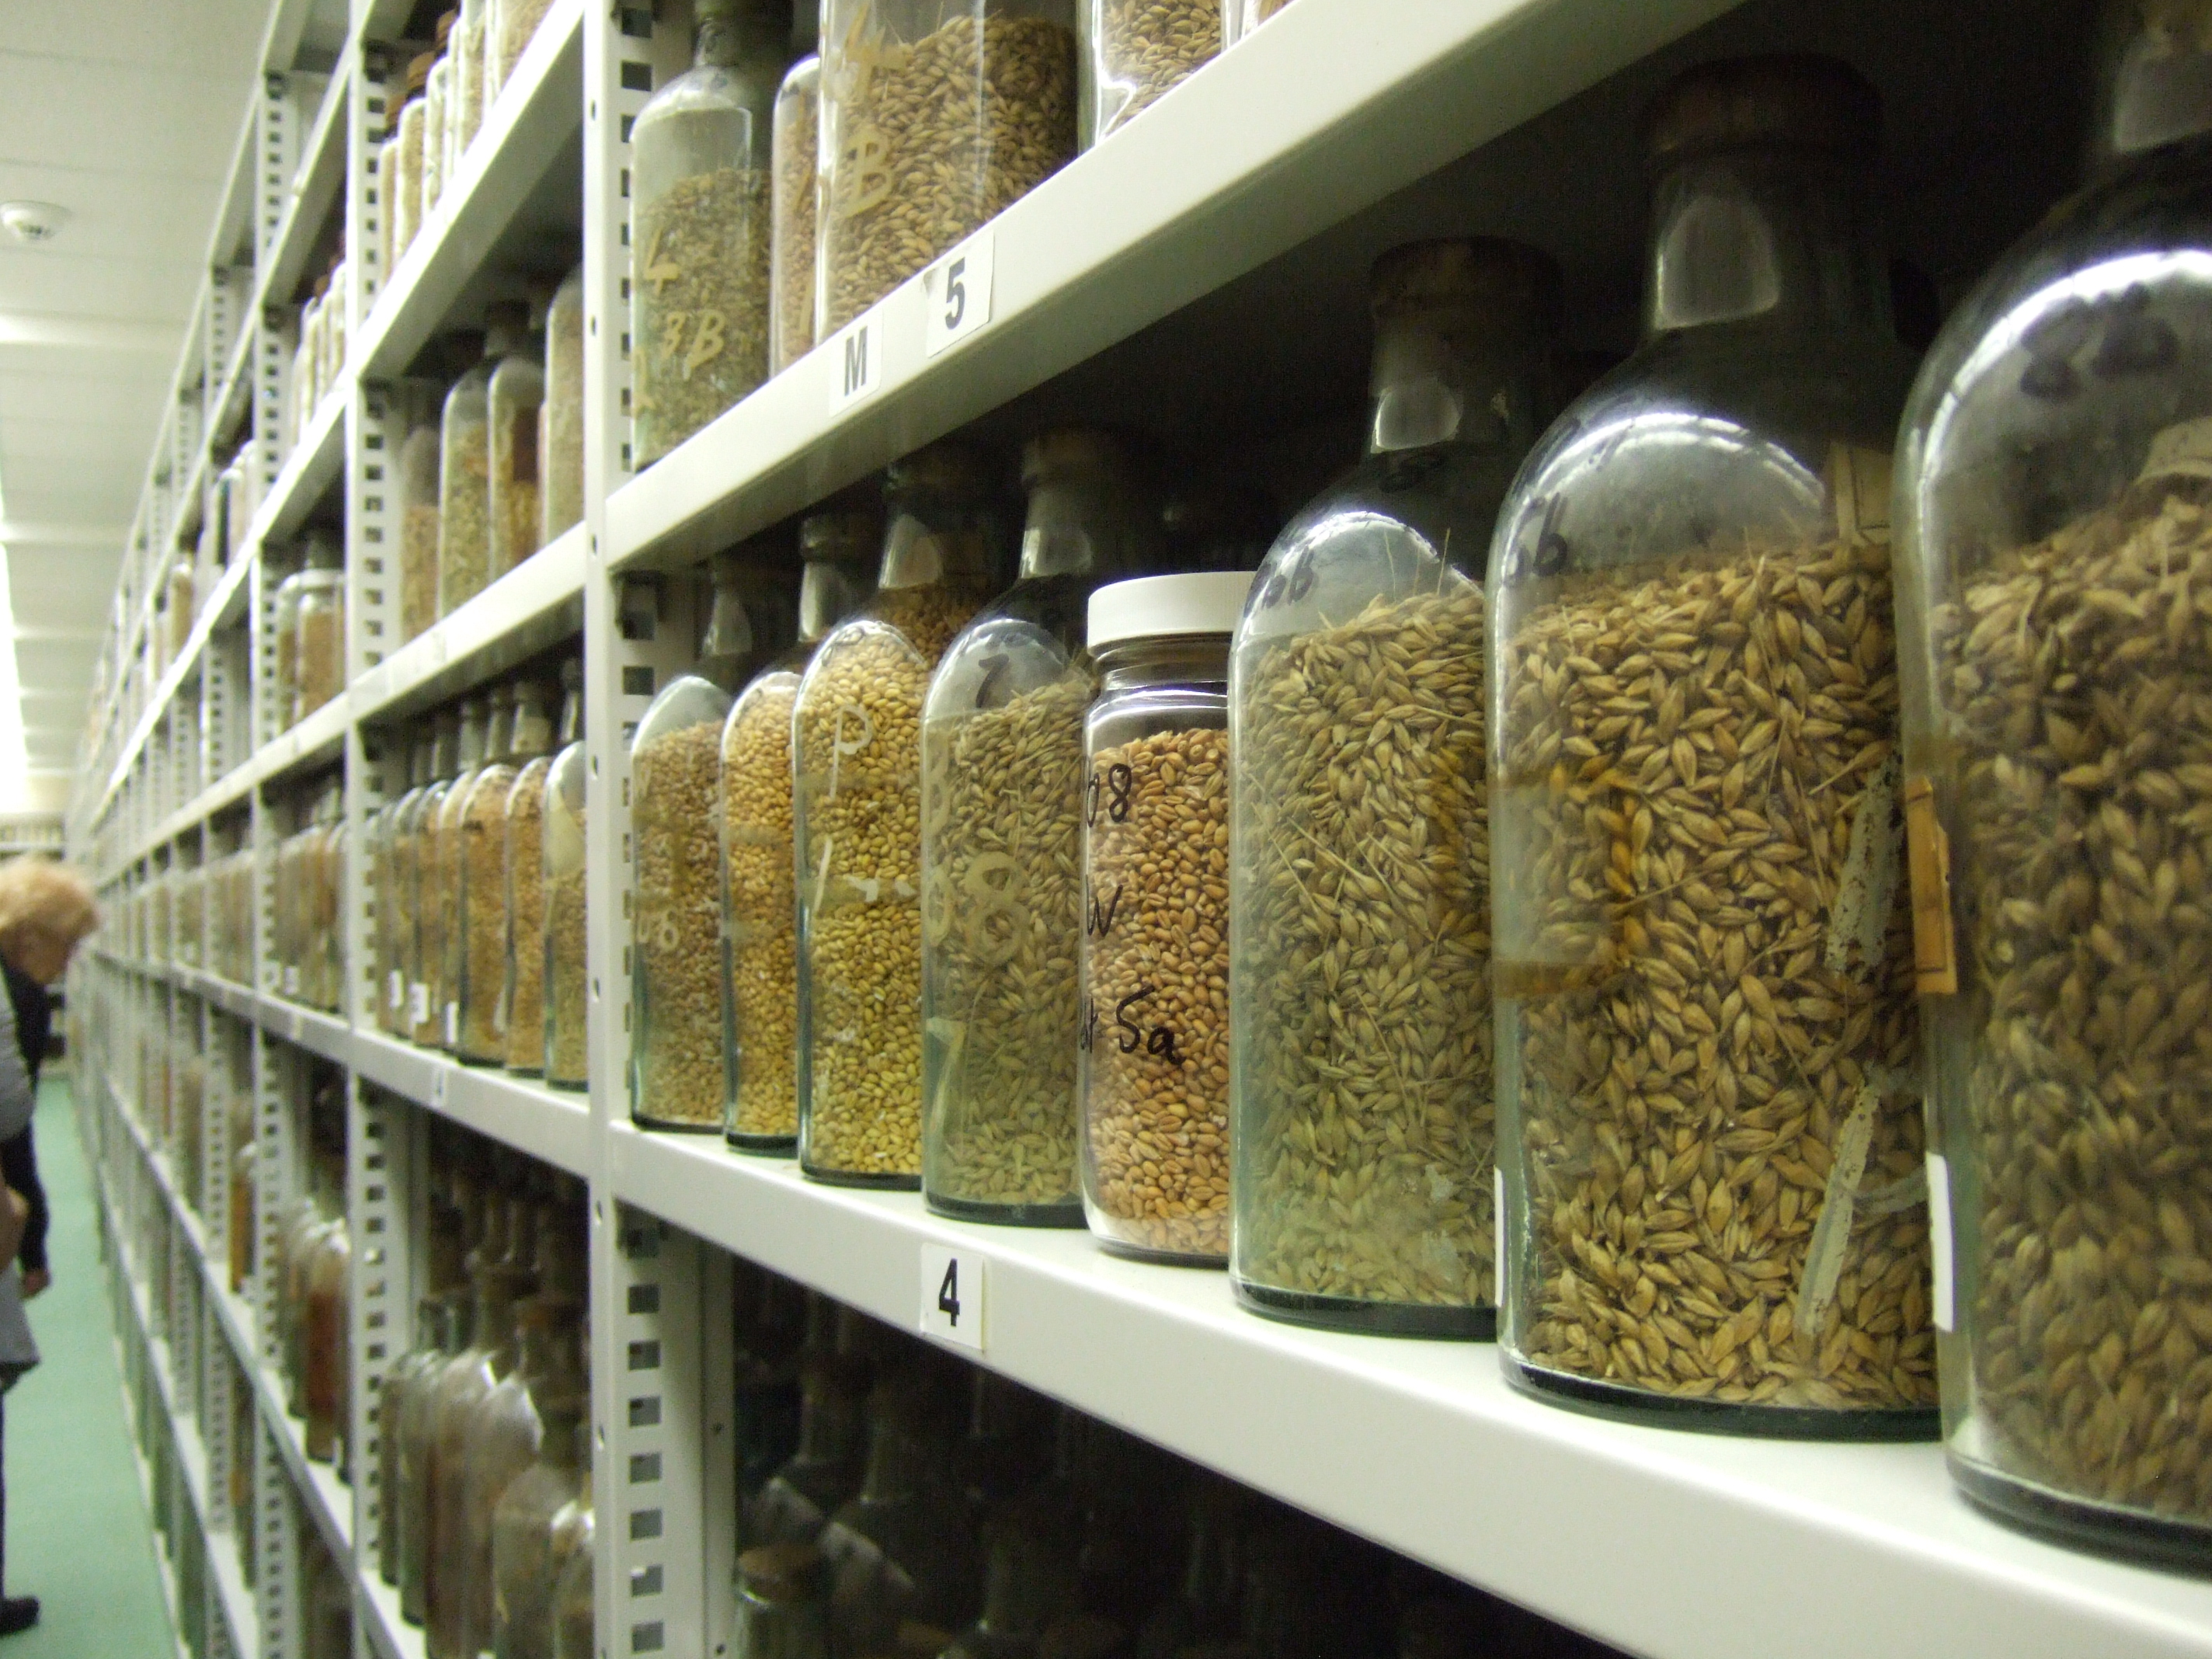 Inside the Rothamsted sample archive